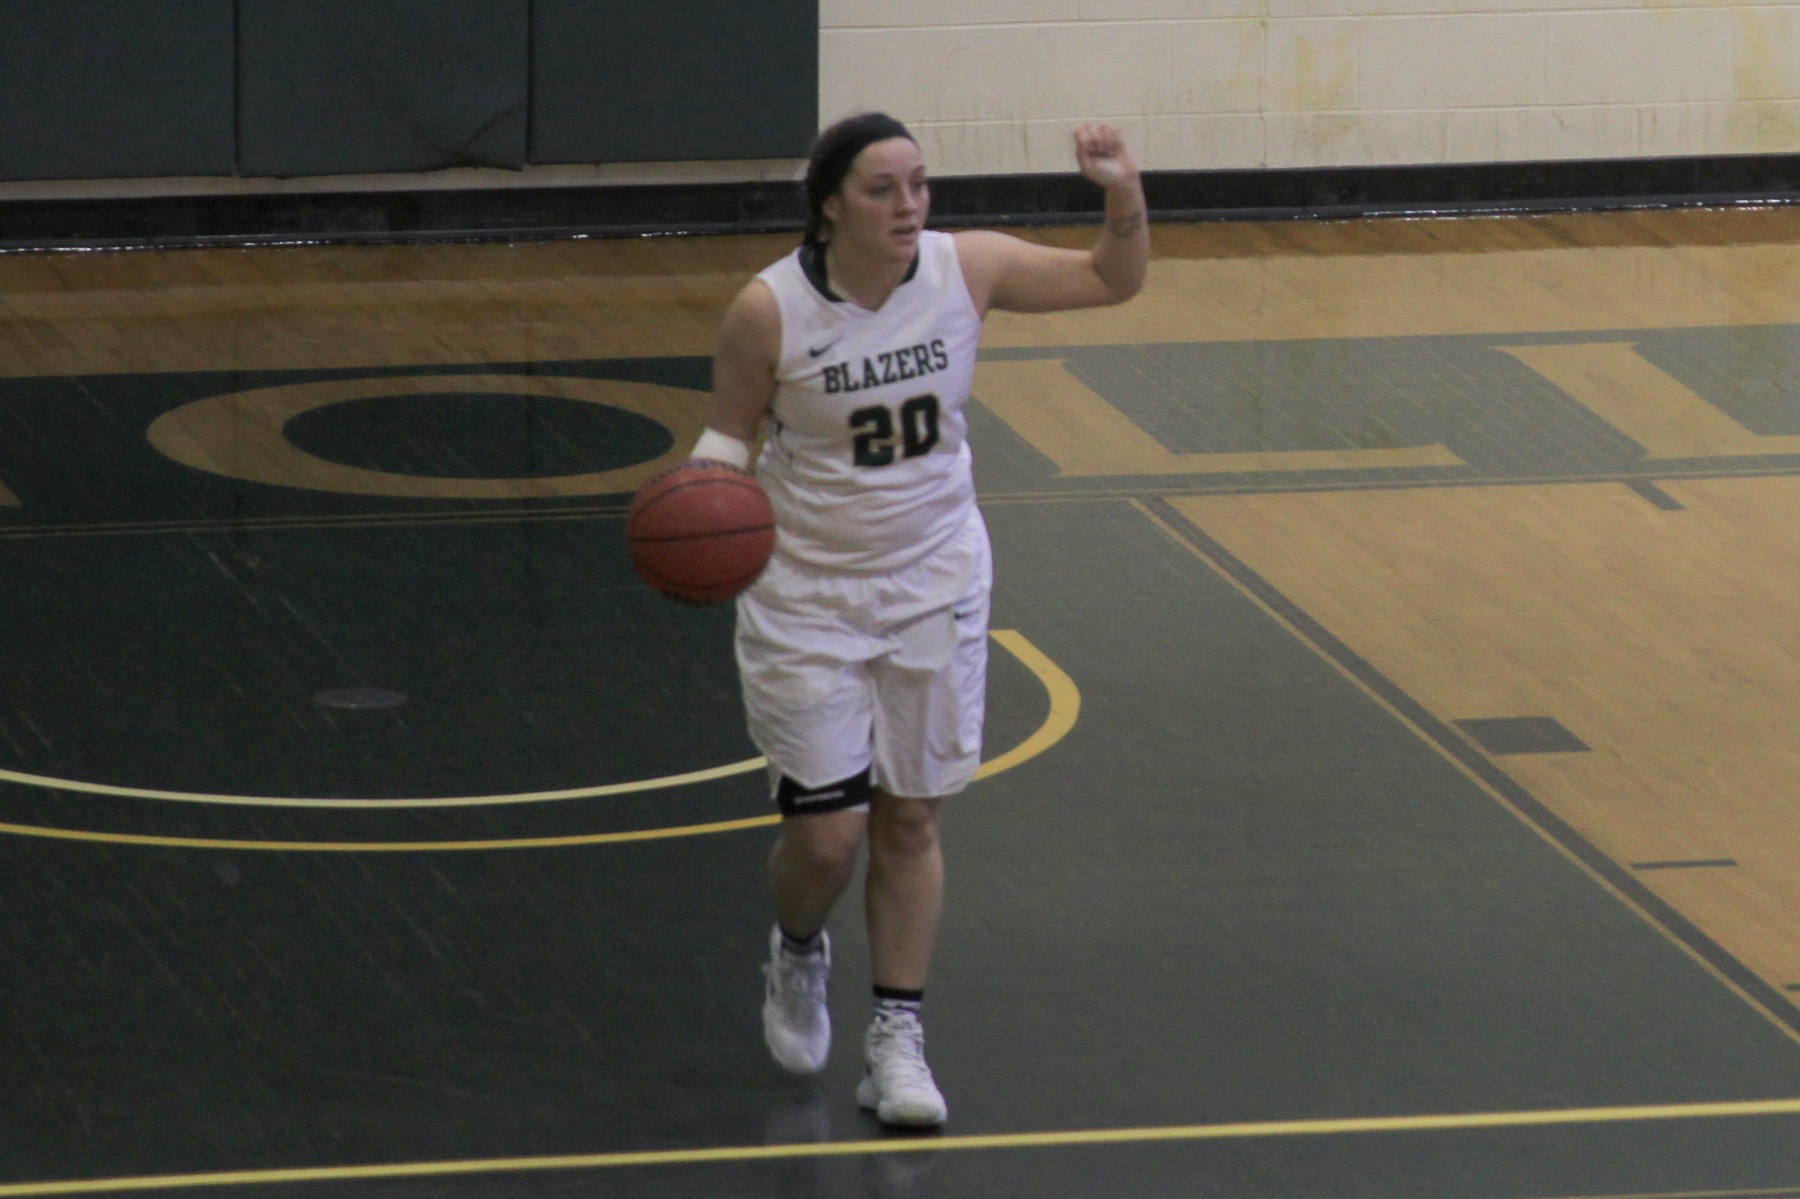 Women's Basketball Falls To Dean After Streaky Offensive Showing